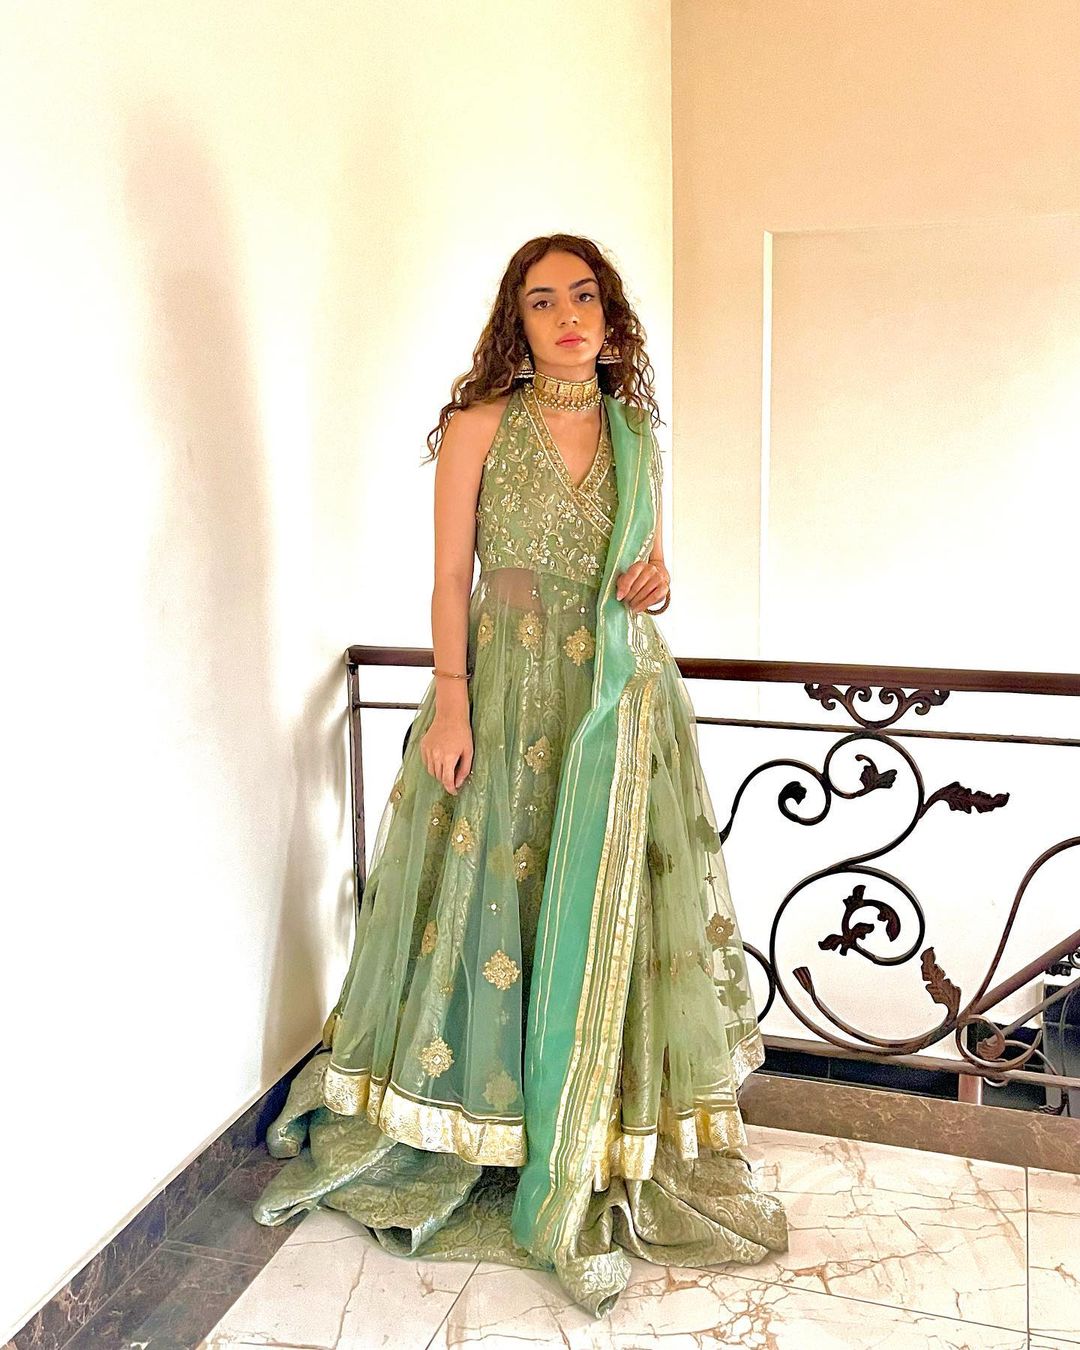 Mehar Bano ties the knot in a regal affair